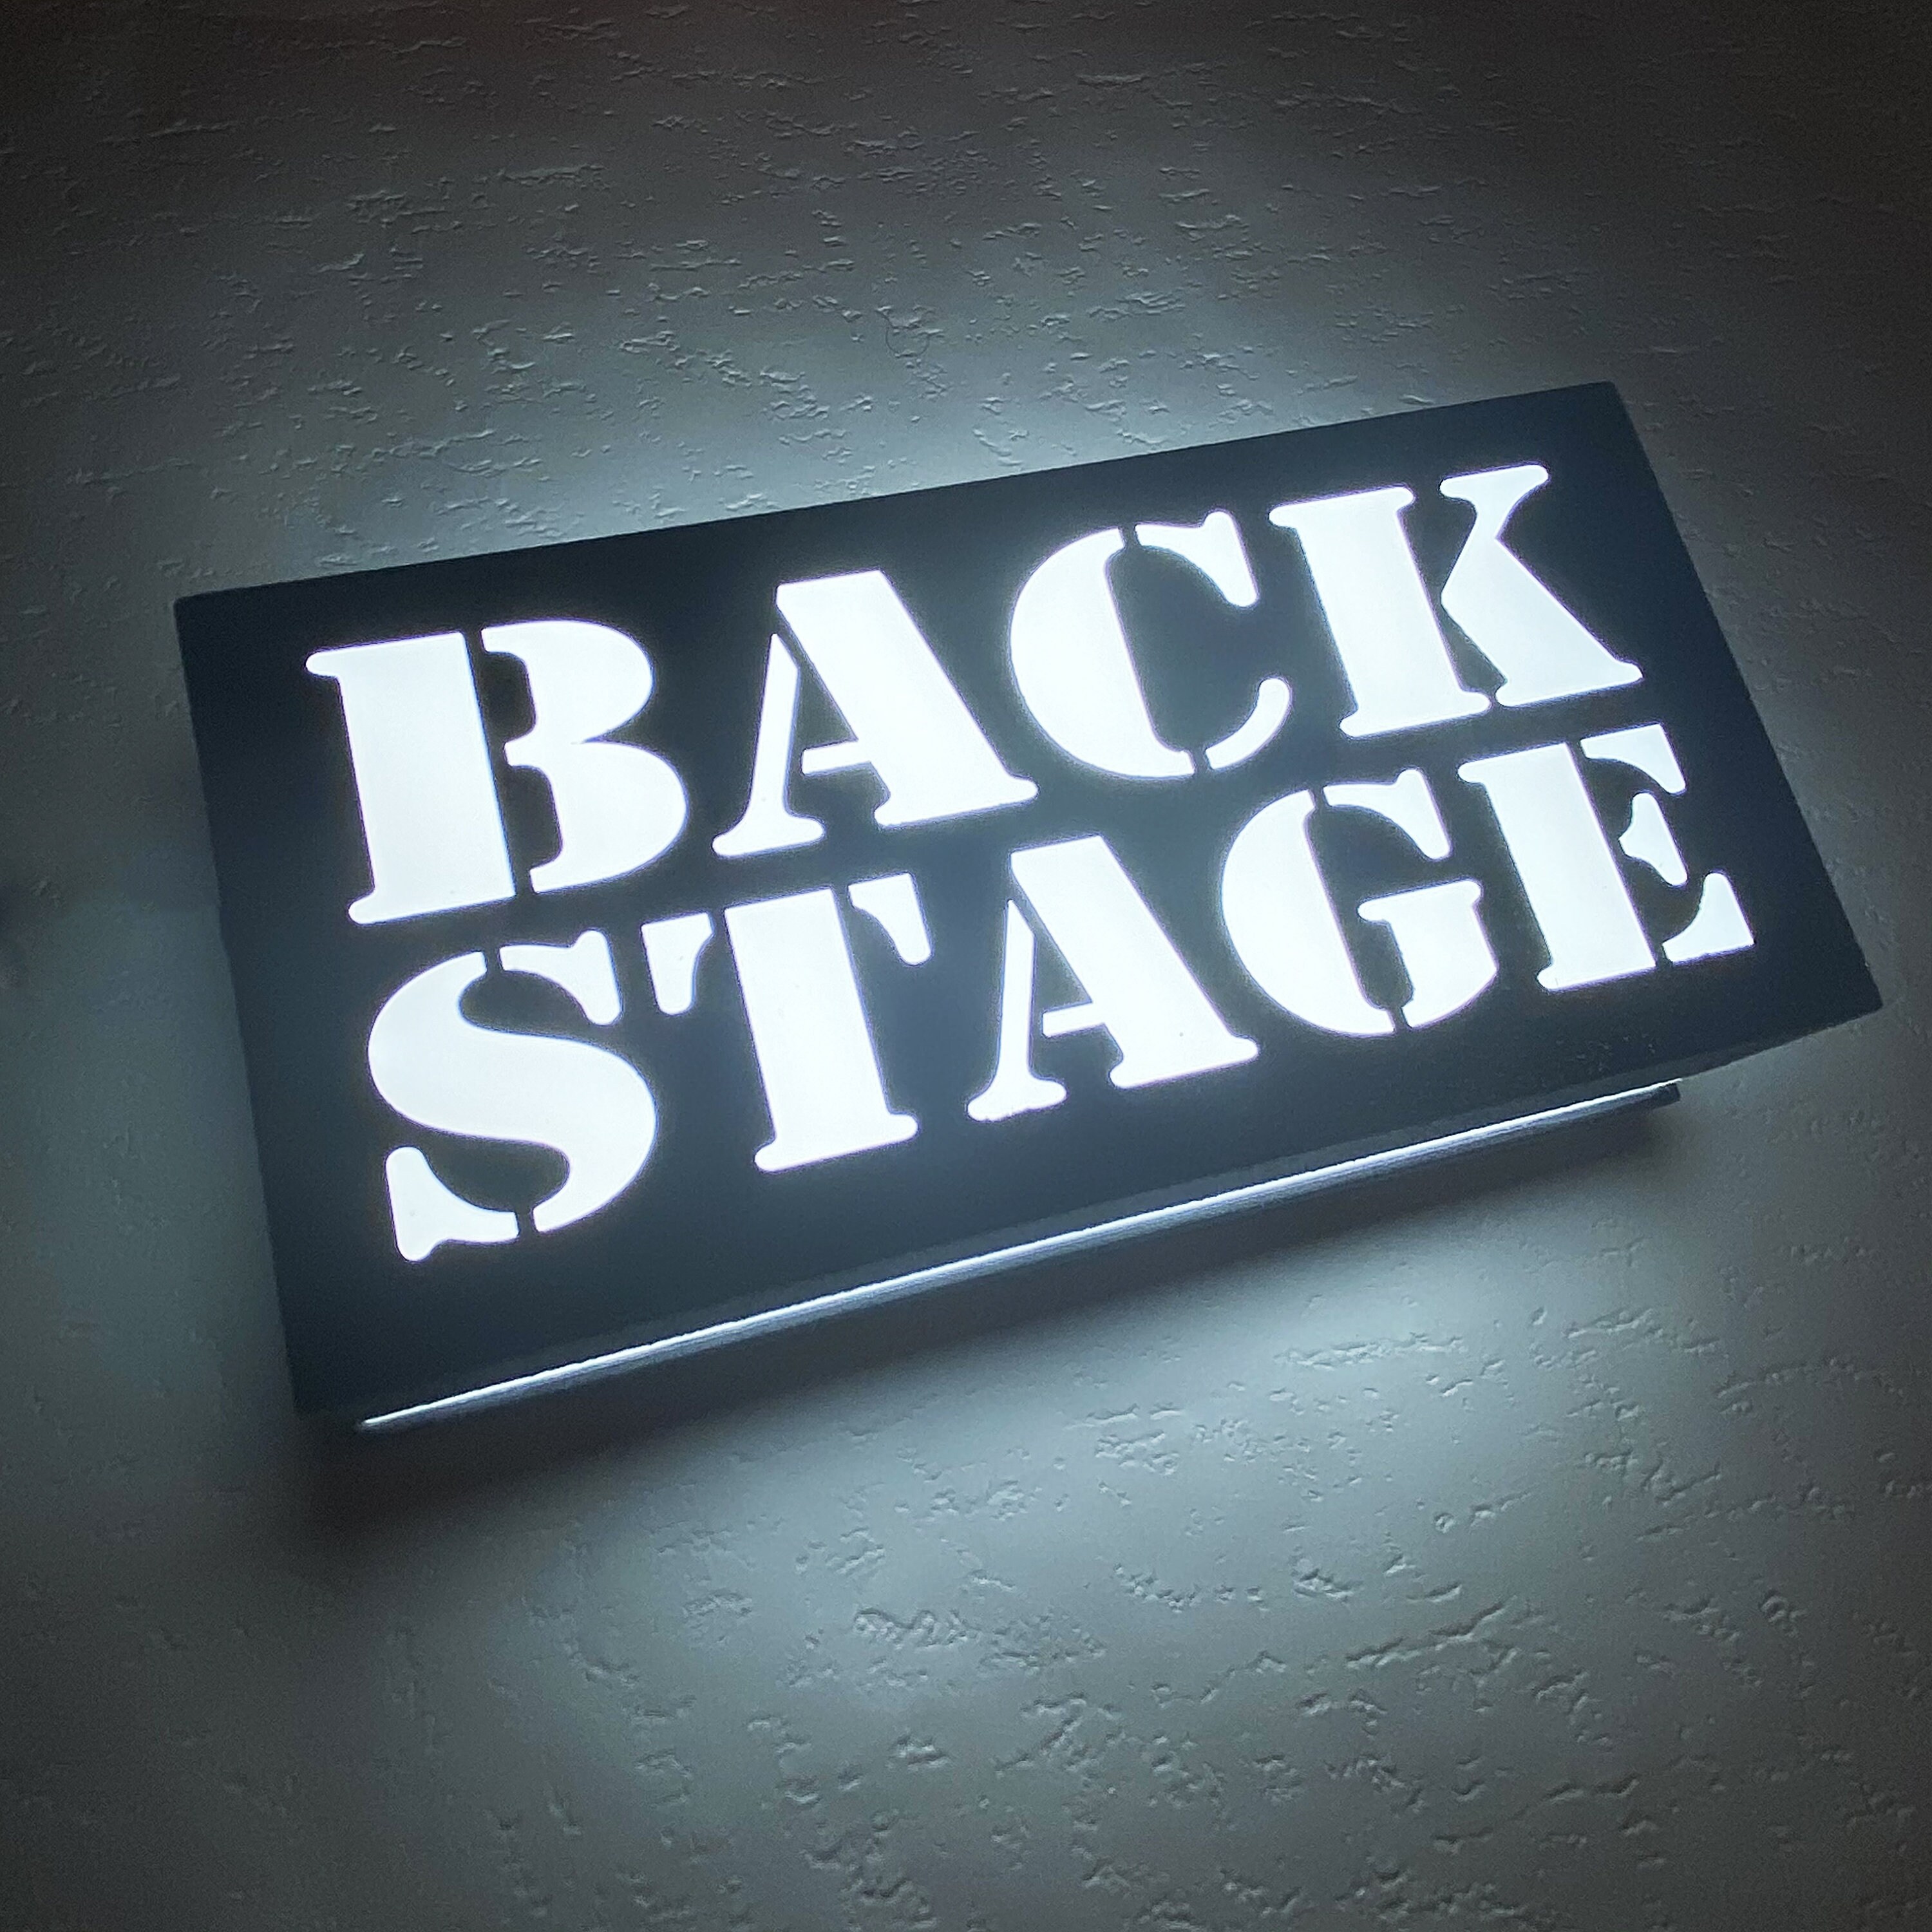 Backstage Sign Led Night Light Lampe d'ambiance Eclairage Applique Murale